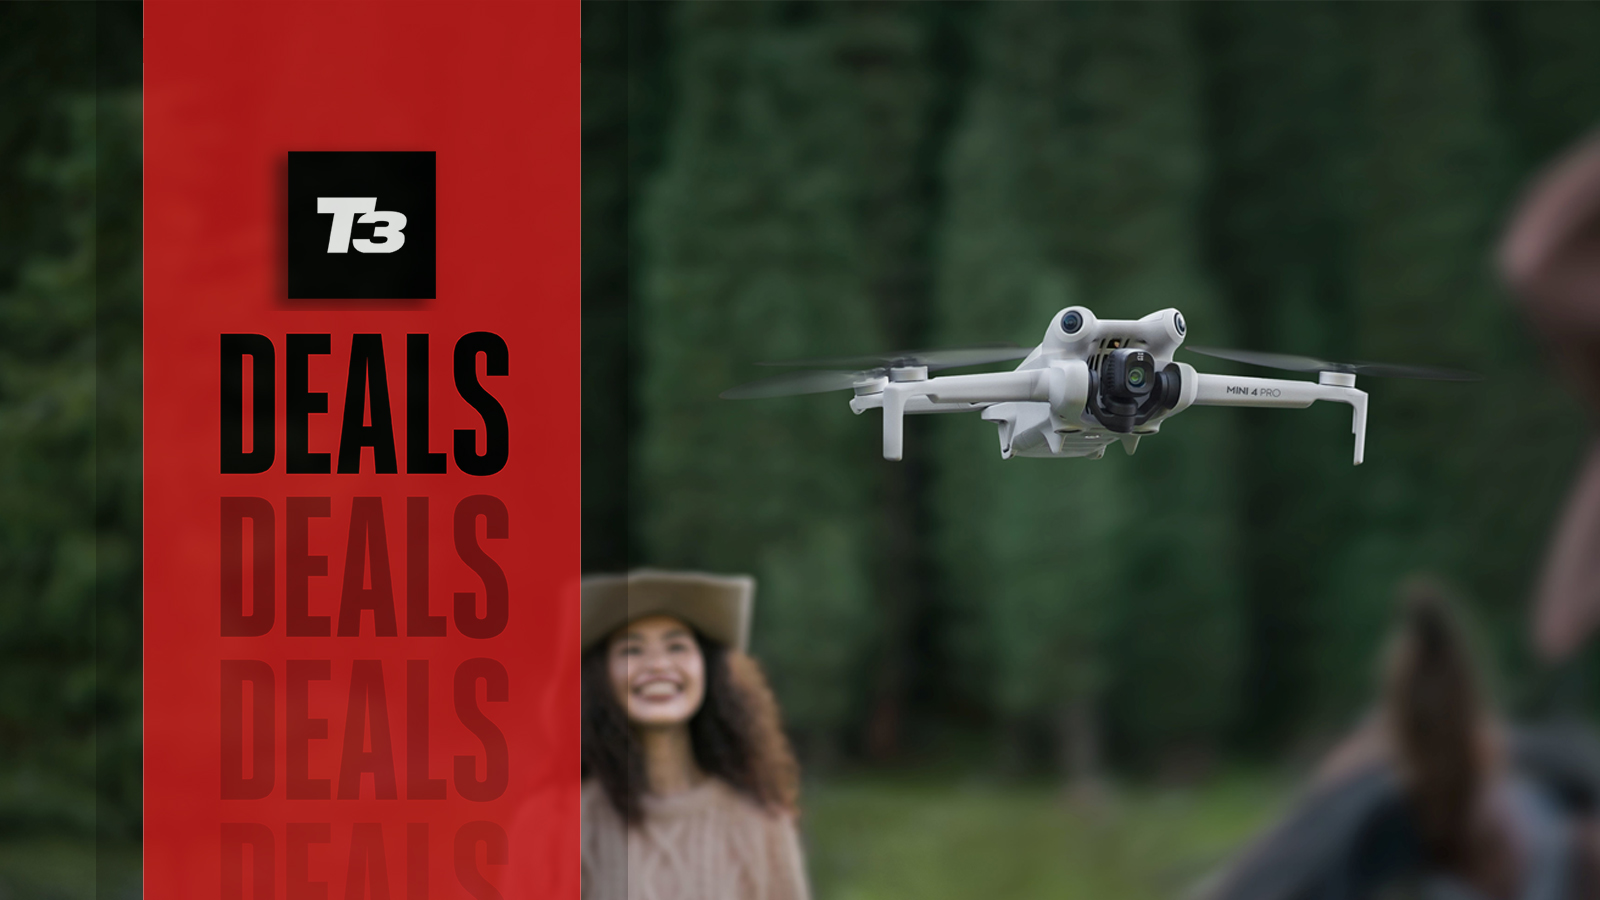 DJI launches cheaper Mini 3 drone just in time for the holidays